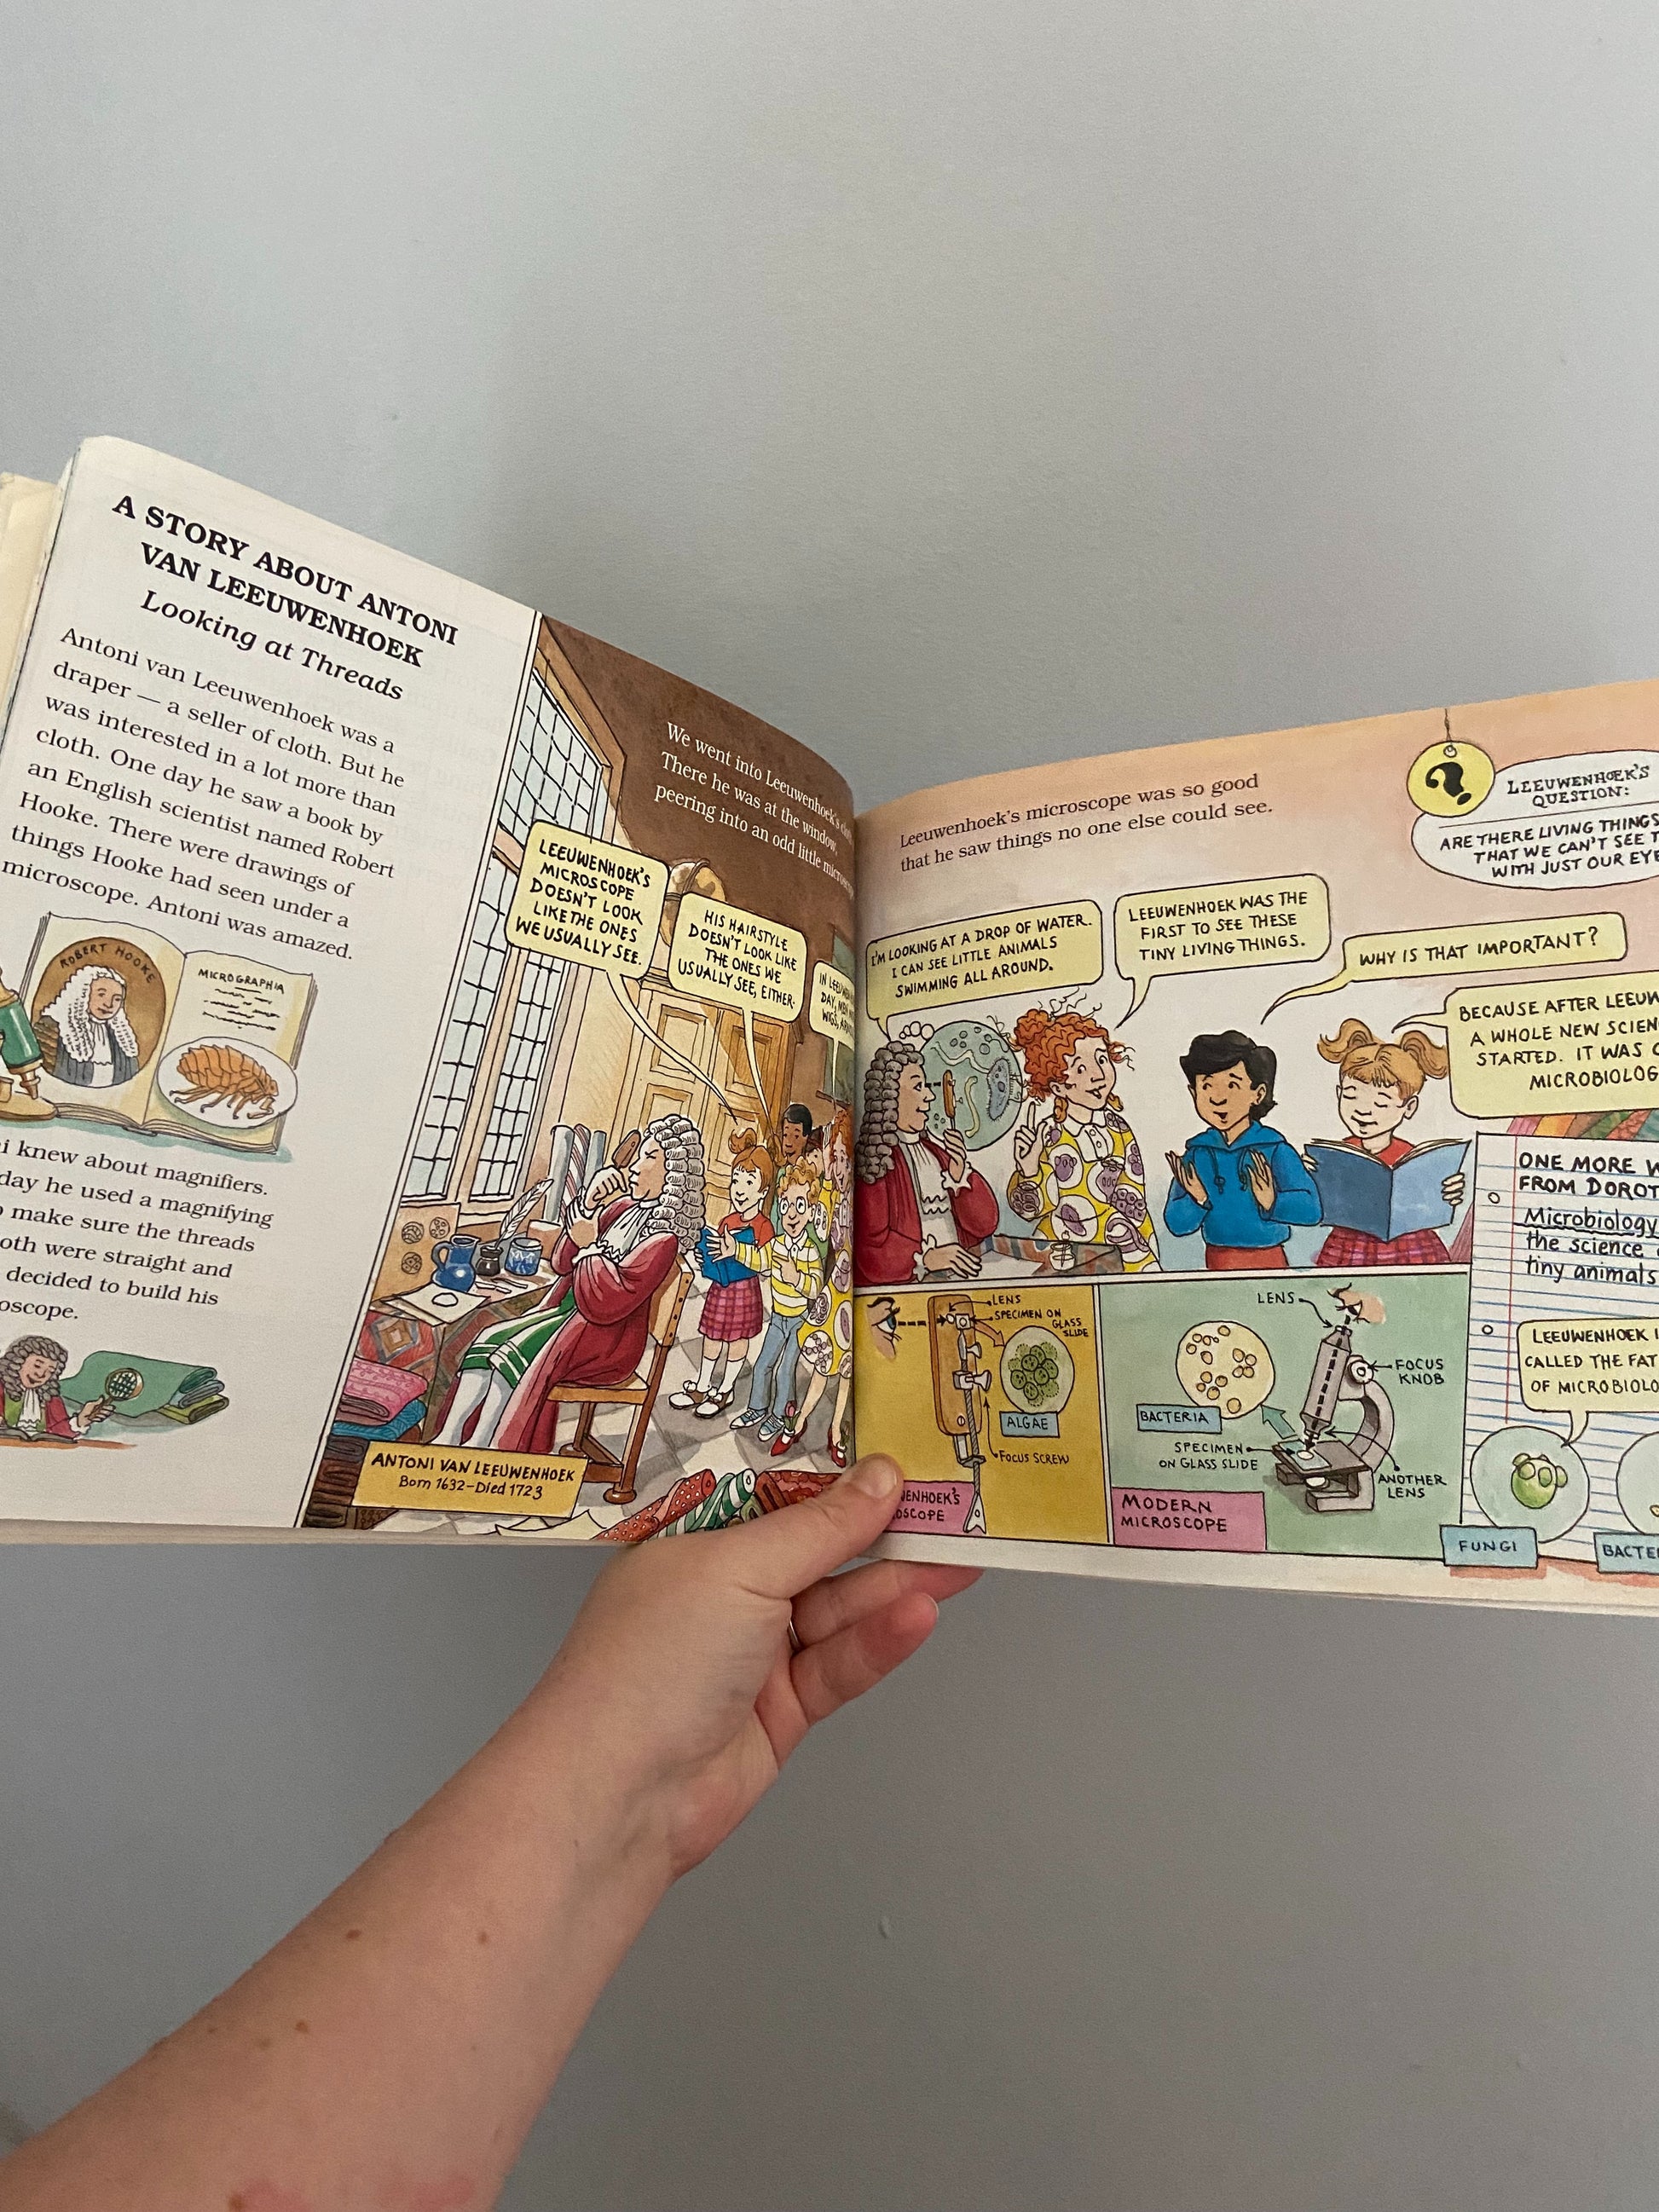 The Magic School Bus and the Science Fait Expedition – The Sweet & Simple  Home